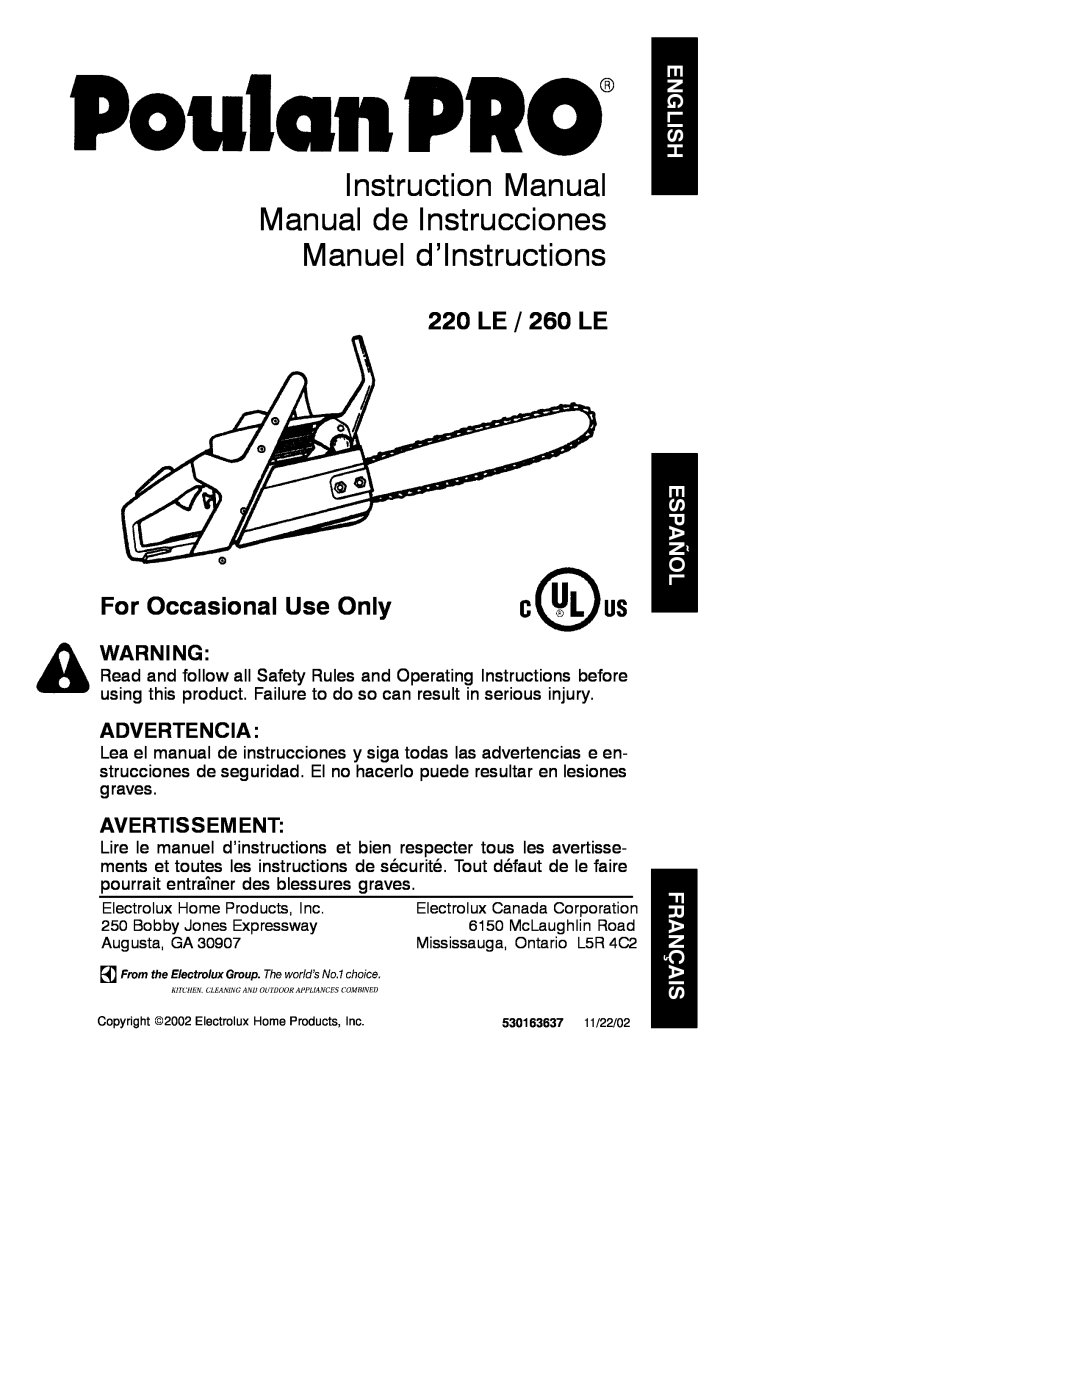 Poulan 530163637 instruction manual 220 LE / 260 LE For Occasional Use Only, Advertencia, Avertissement 